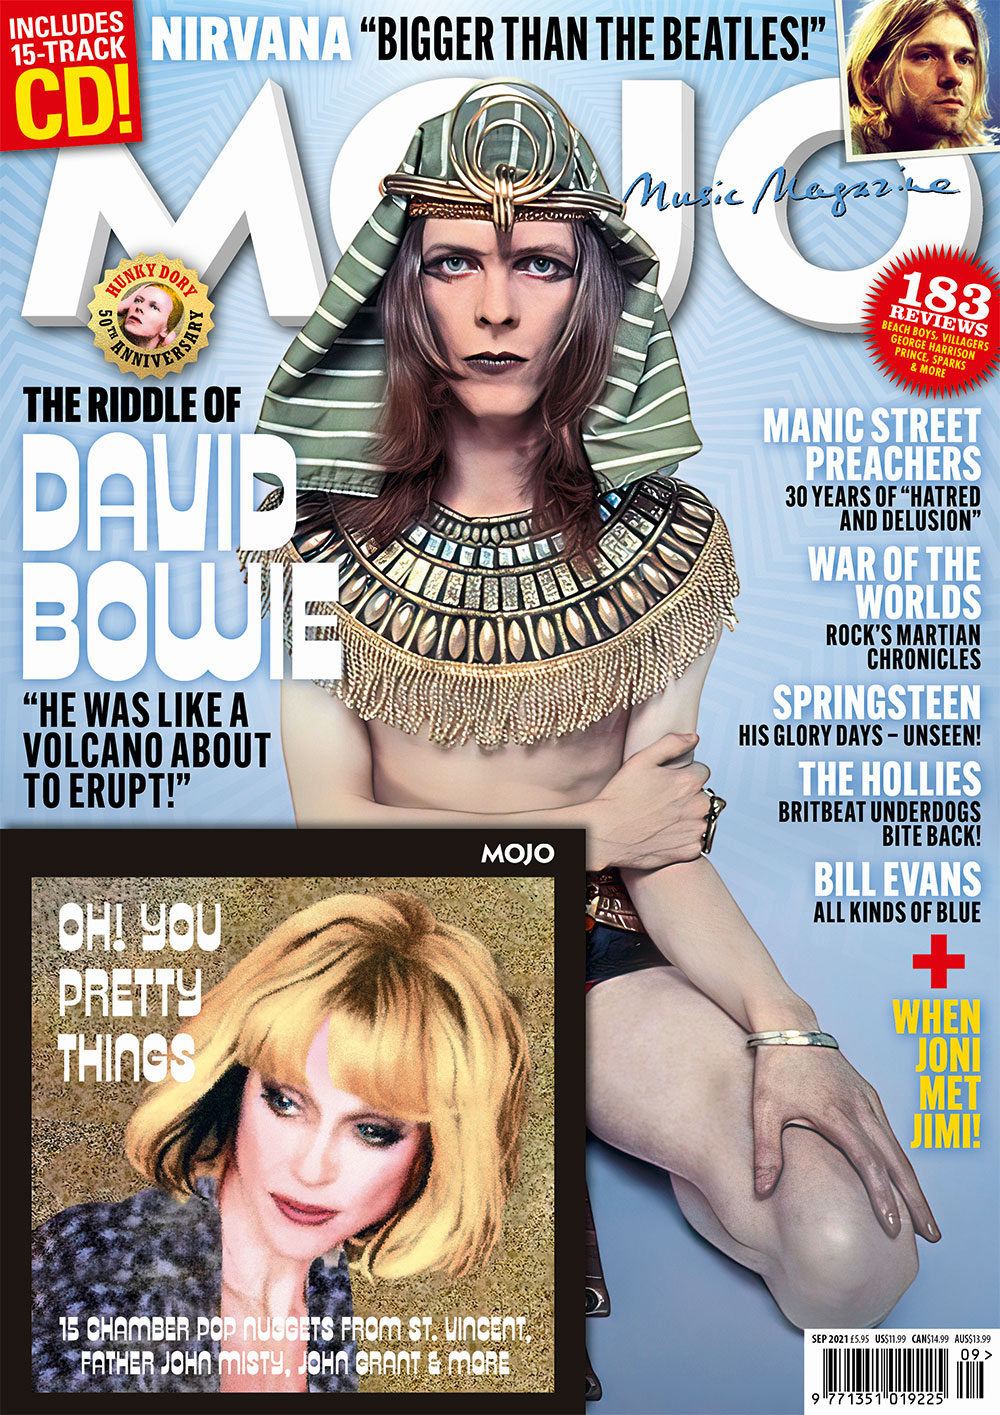 MOJO Magazine #334 – September 2021: David Bowie Bruce Springsteen The Hollies